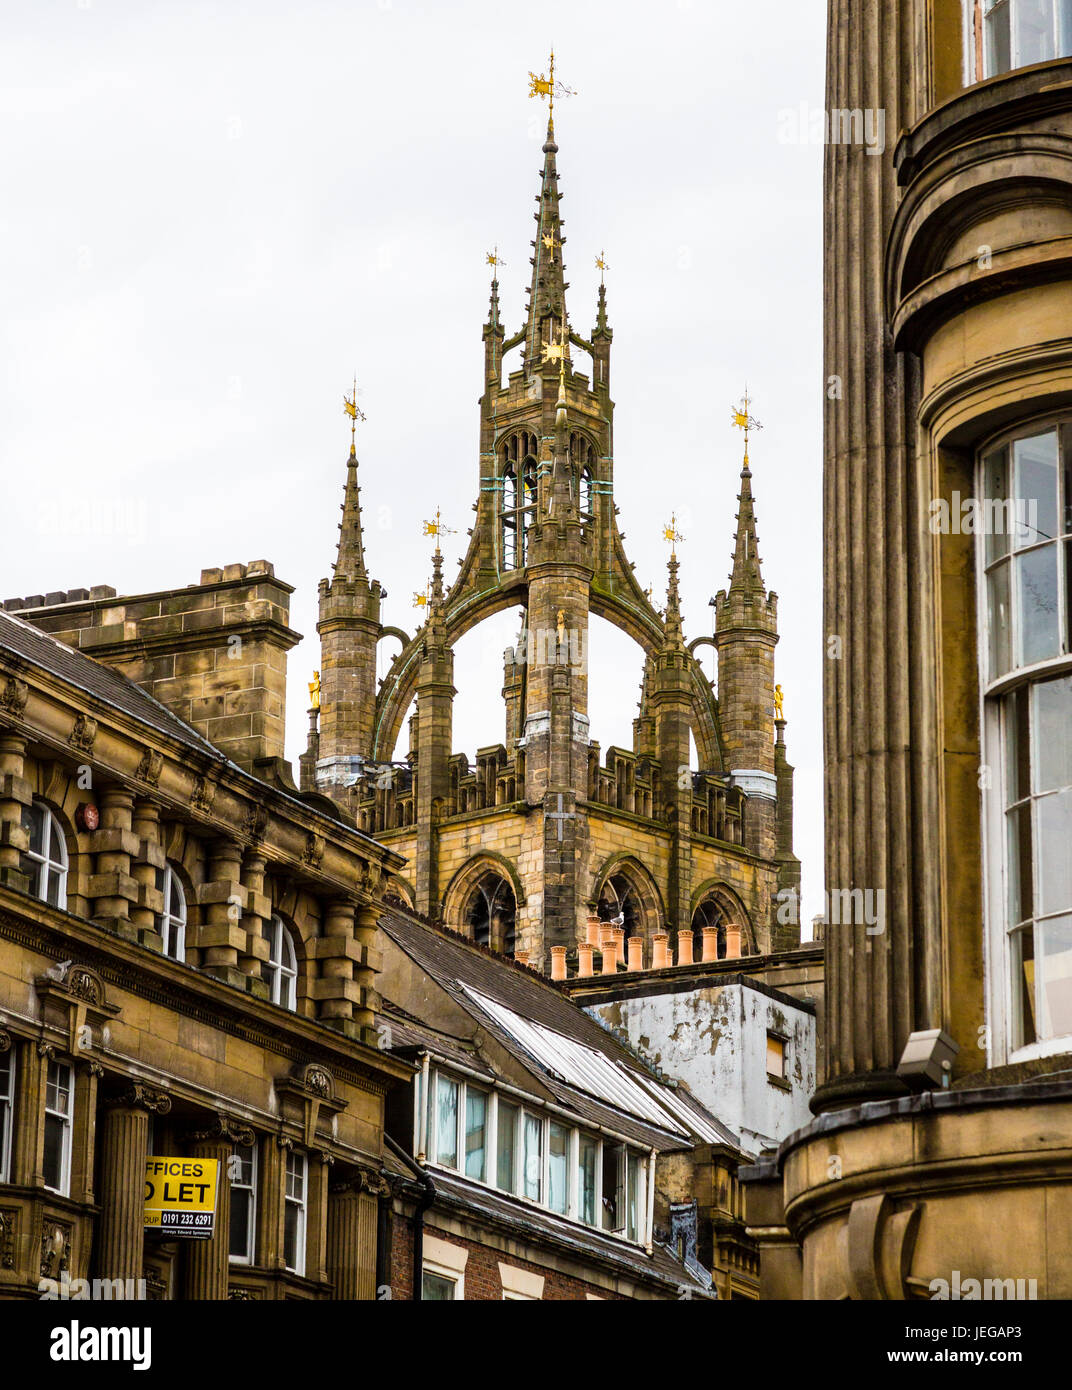 Newcastle-upon-Tyne, England, UK.  Ornate Spires of the Cathedral Church of St. Nicholas.  The lantern spire dates from the 15th. century. Stock Photo